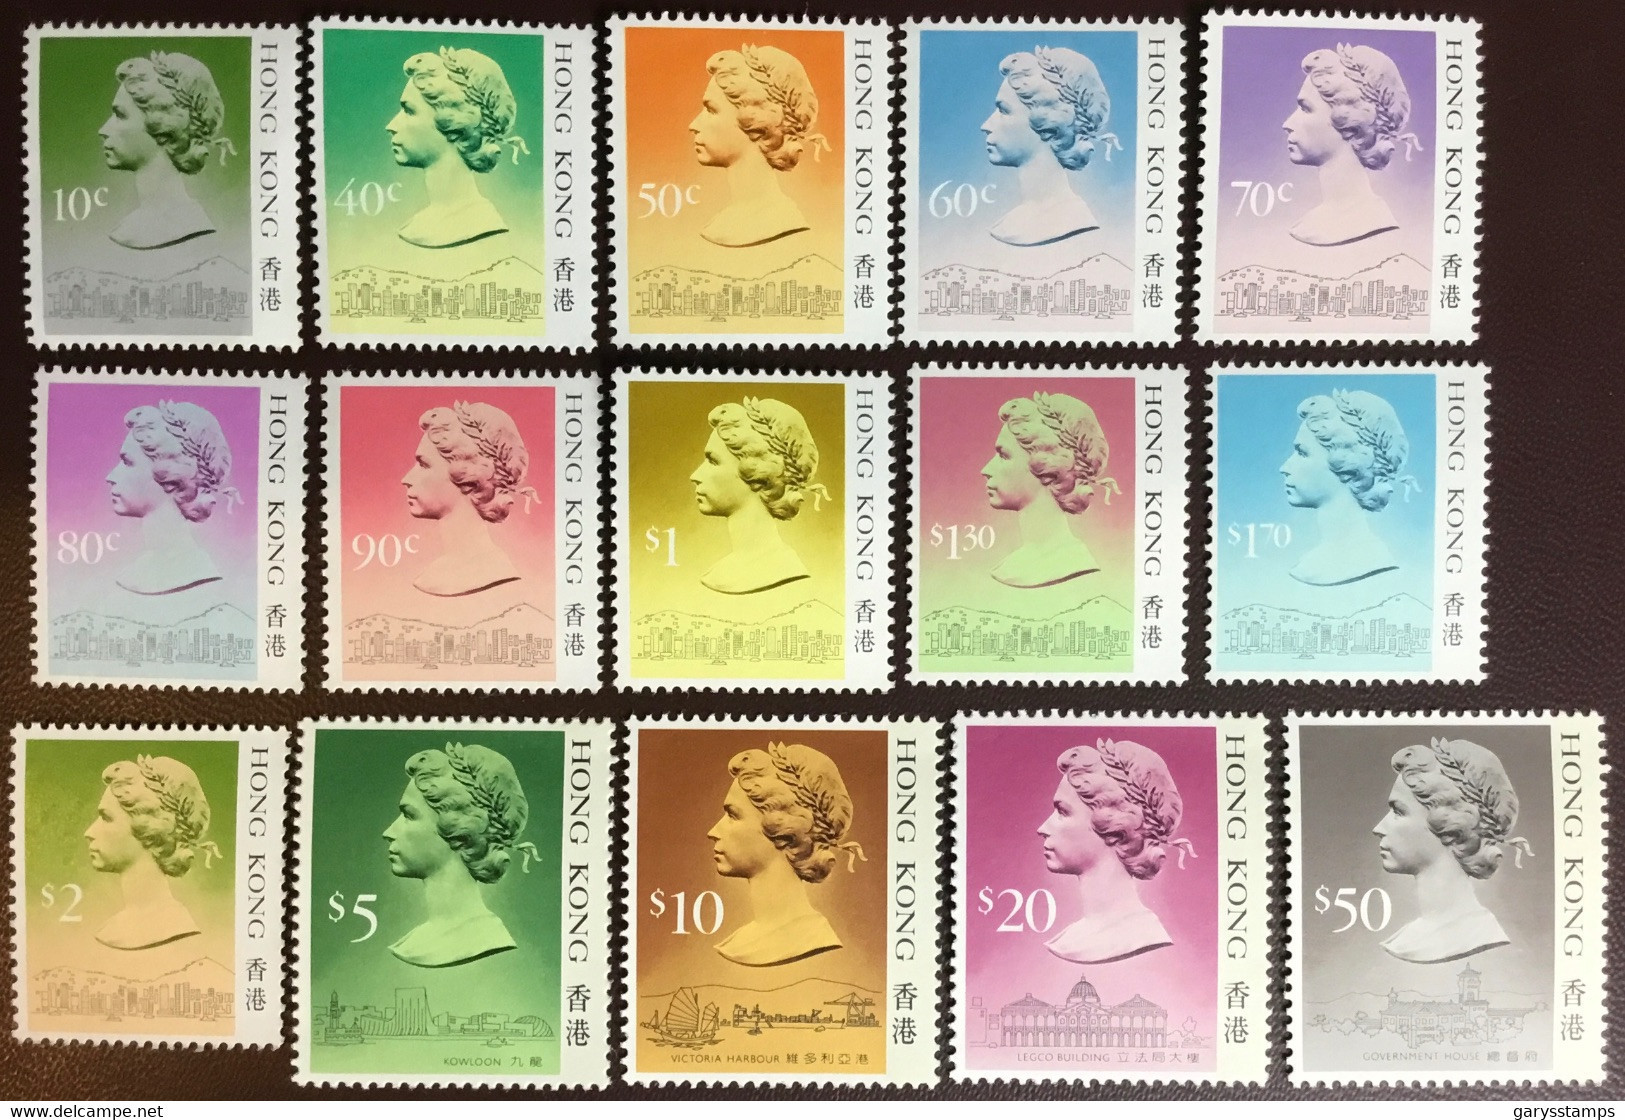 Hong Kong 1987 Definitives Set Less $1.70 Type 1 (Darker Shade Under Chin) MNH - Unused Stamps